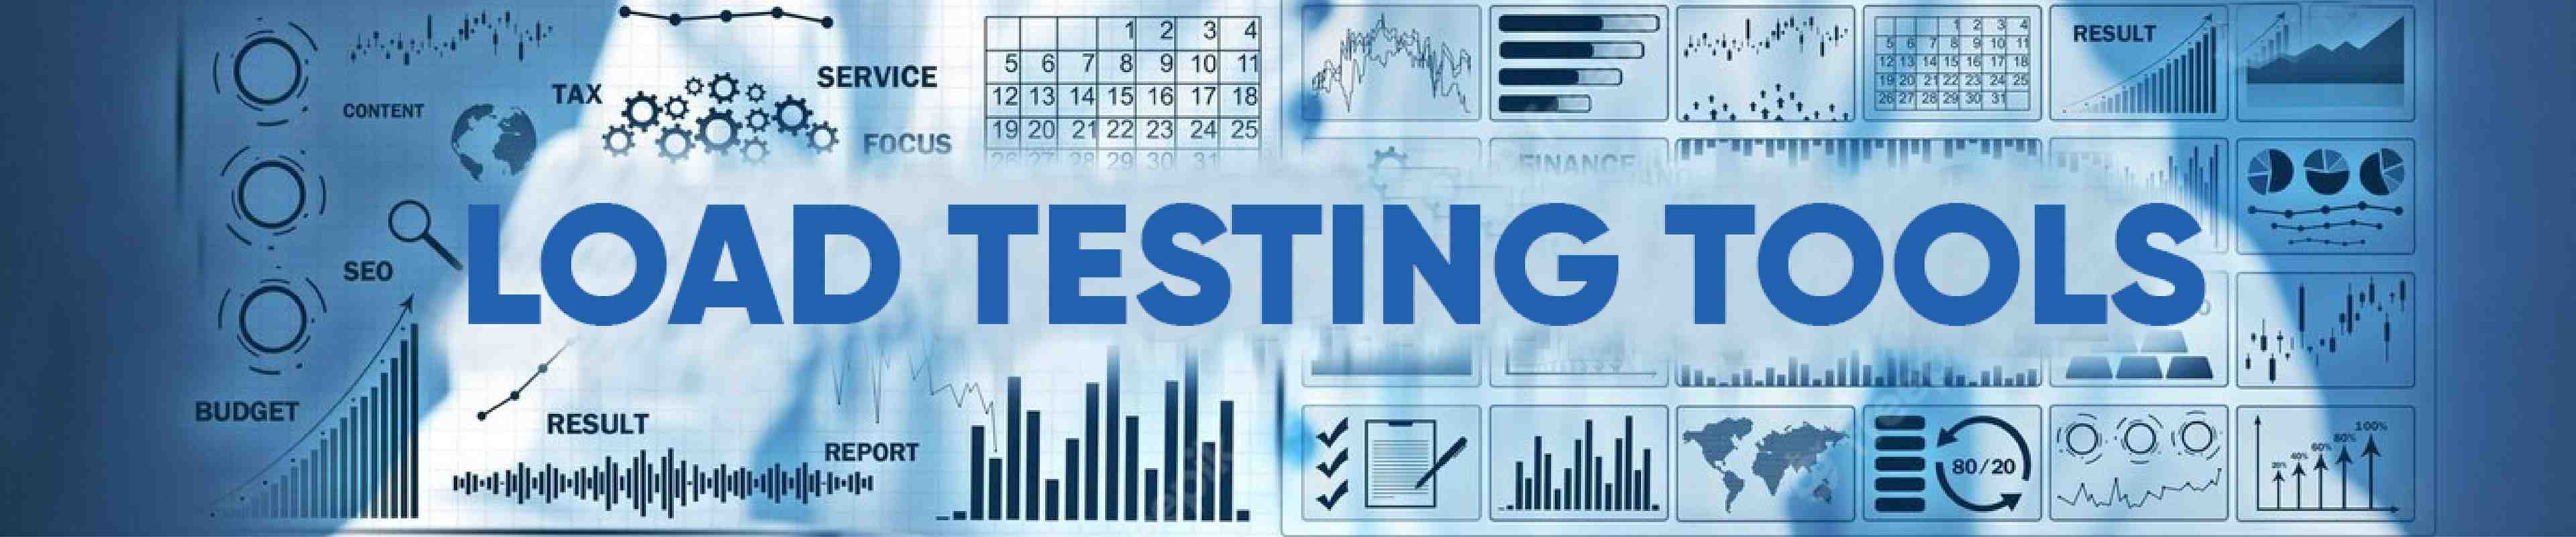 11 Best Automation Testing Tools